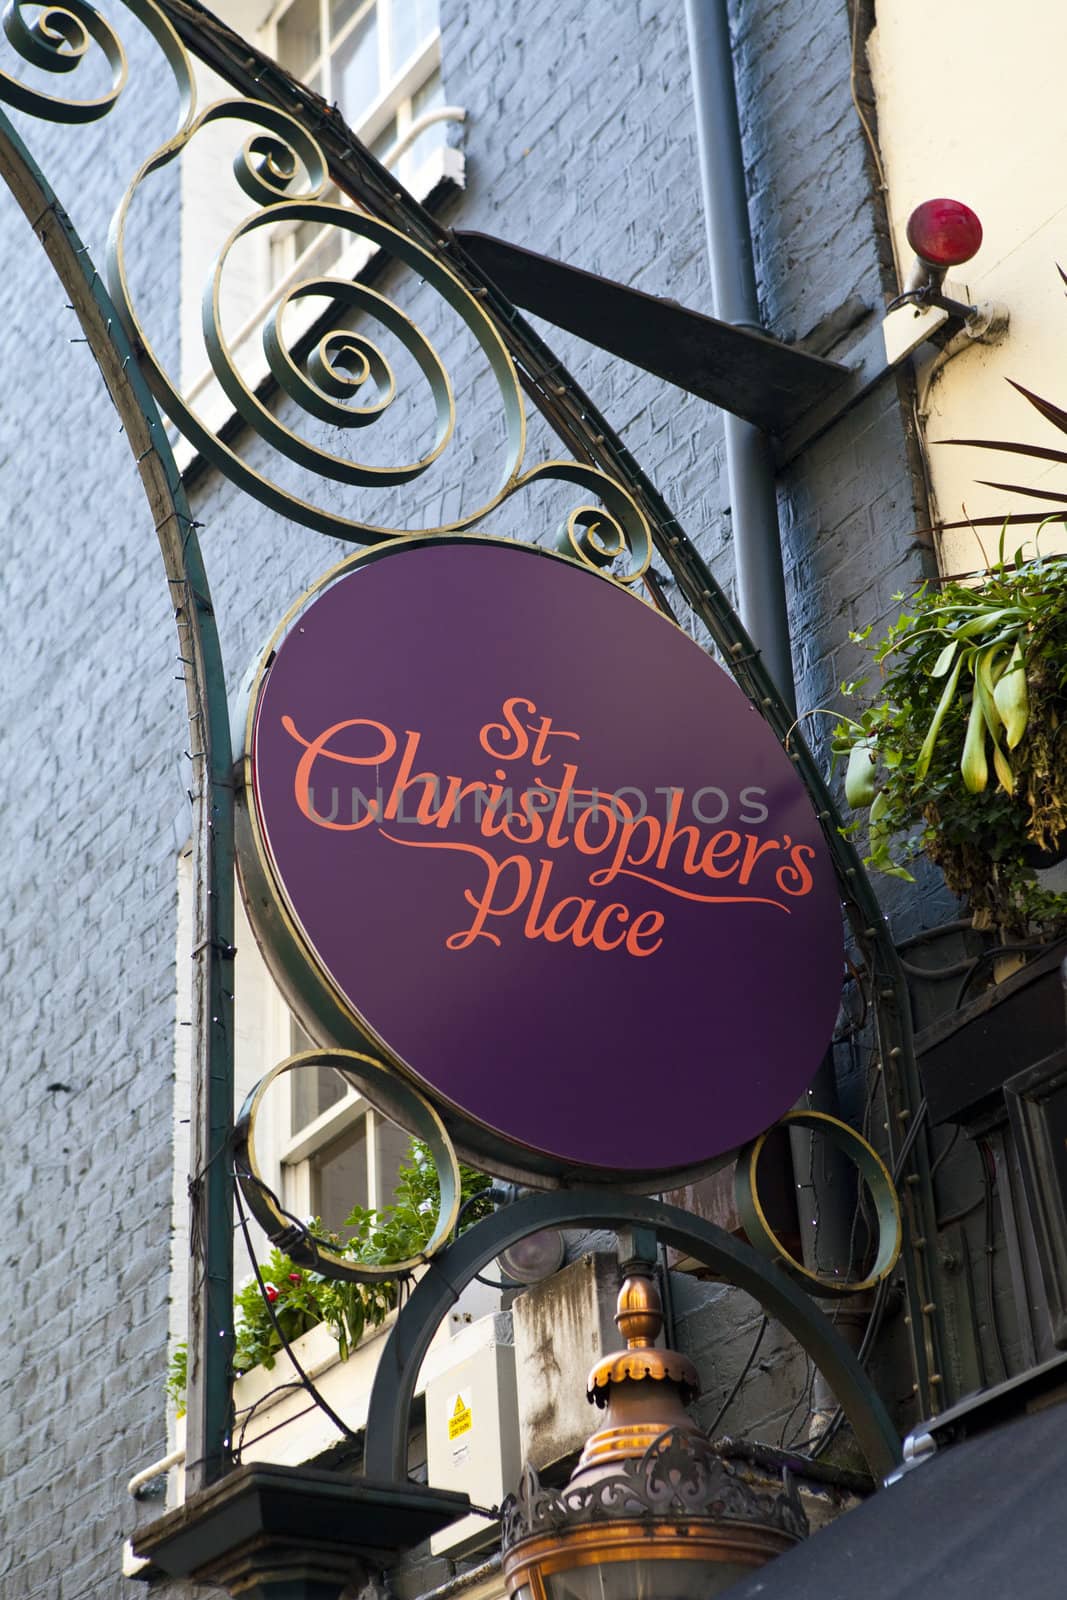 Sign for St. Christopher's Place in London.